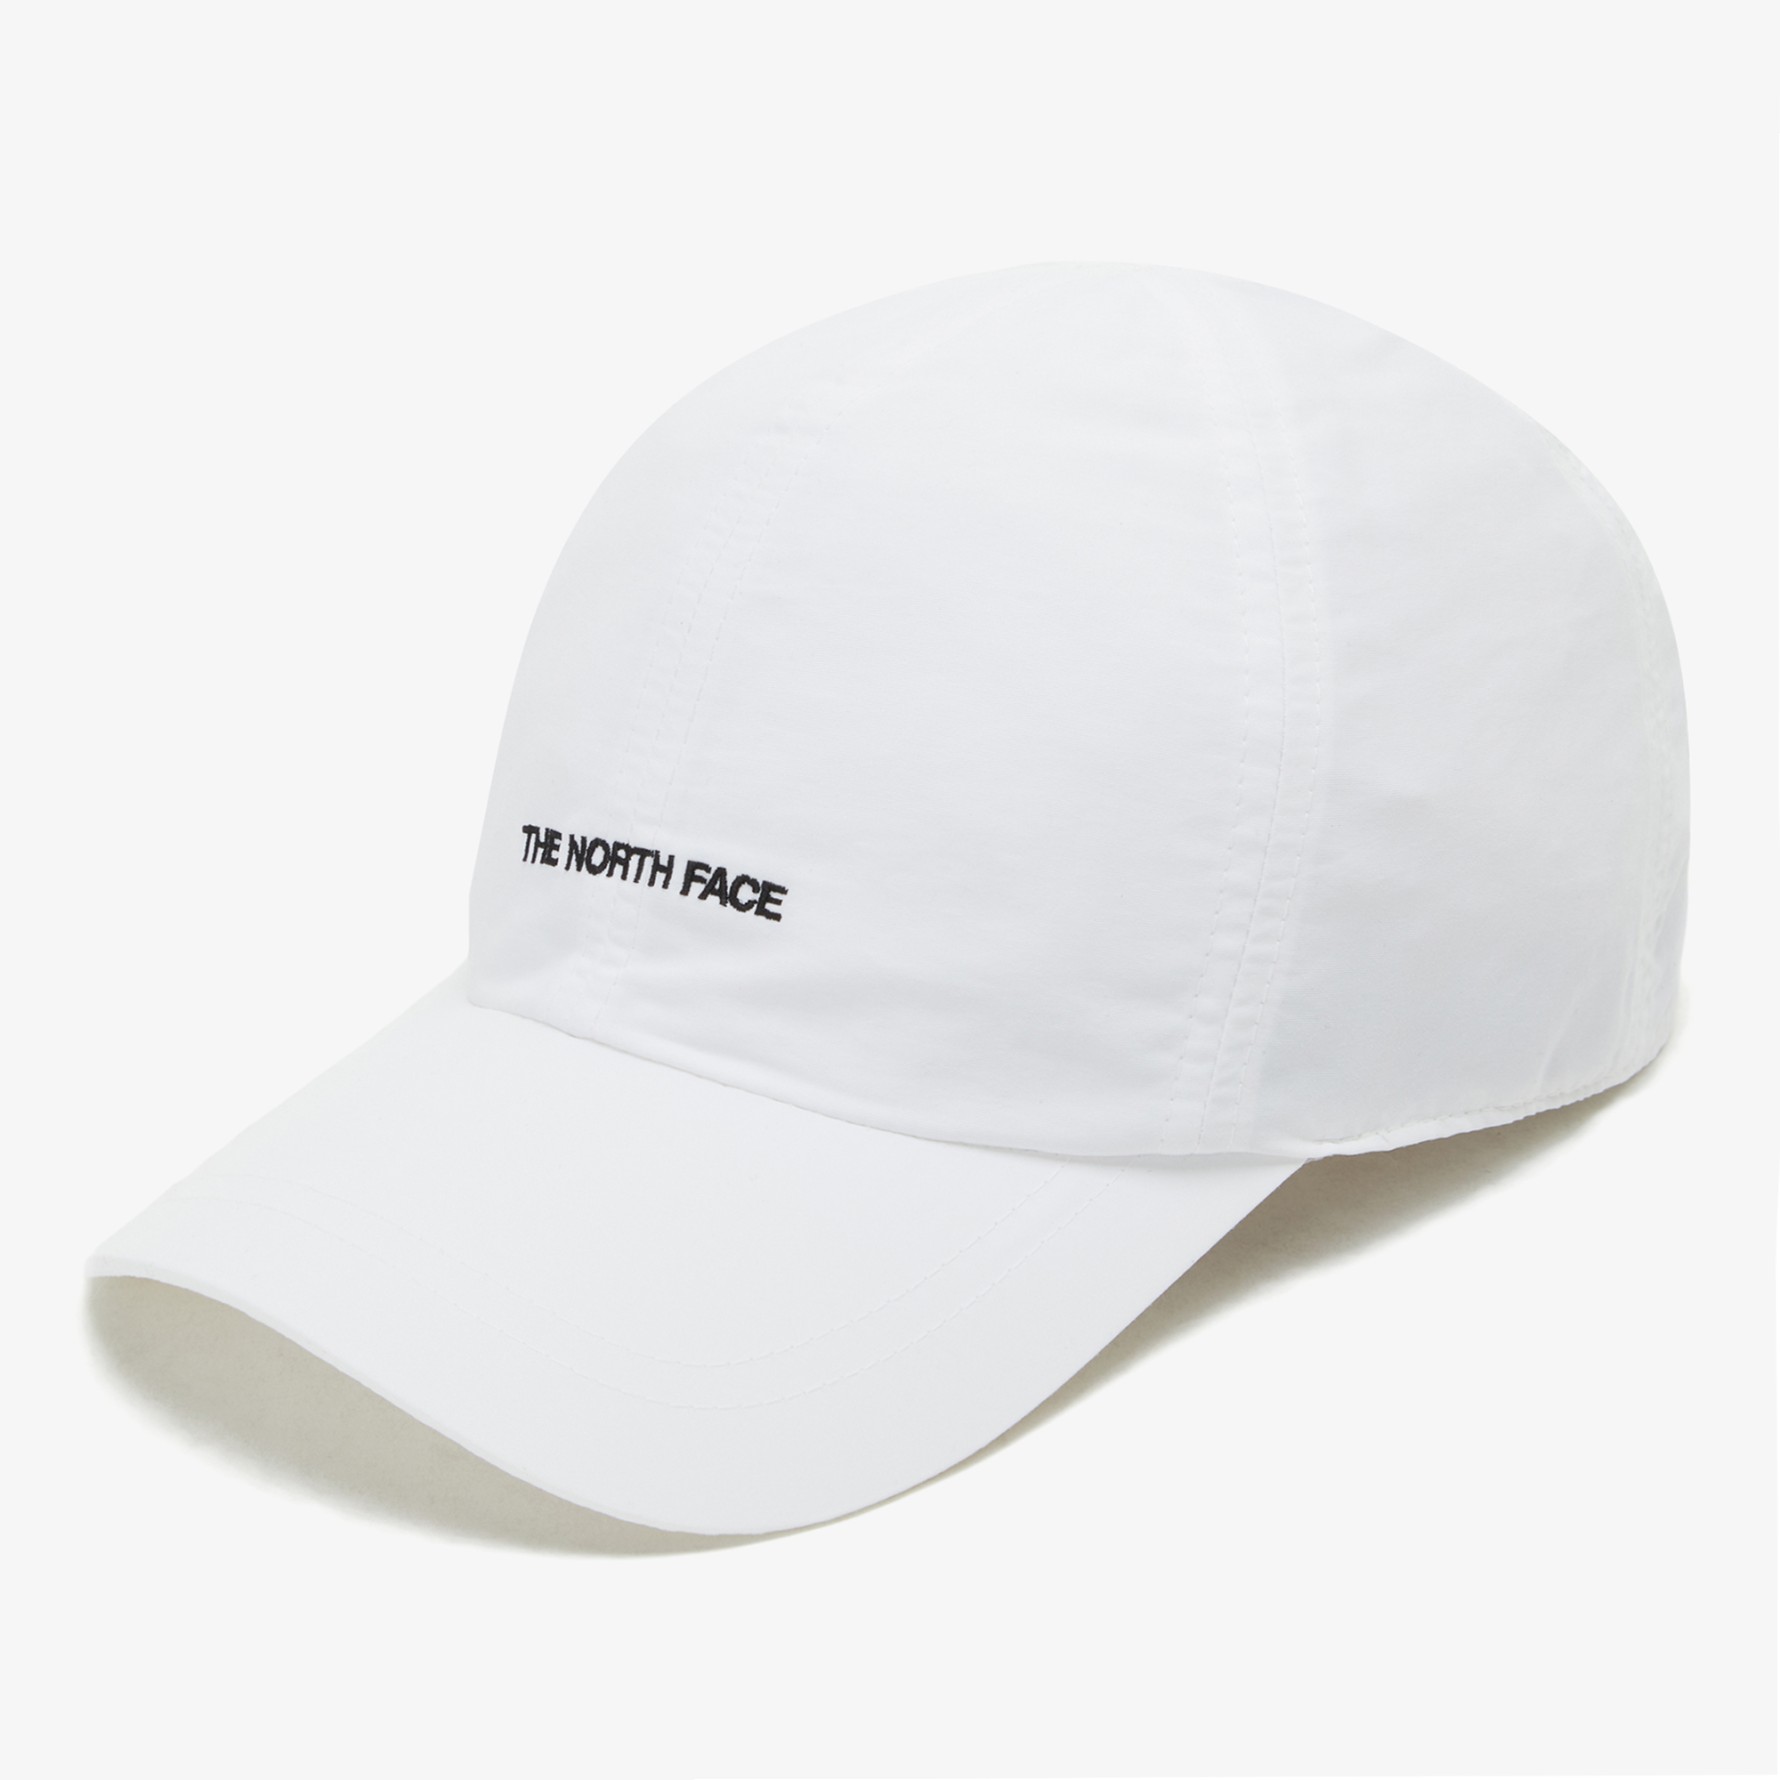 THE NORTH FACE - TNF WORDING BALL CAP/EX (WHITE)